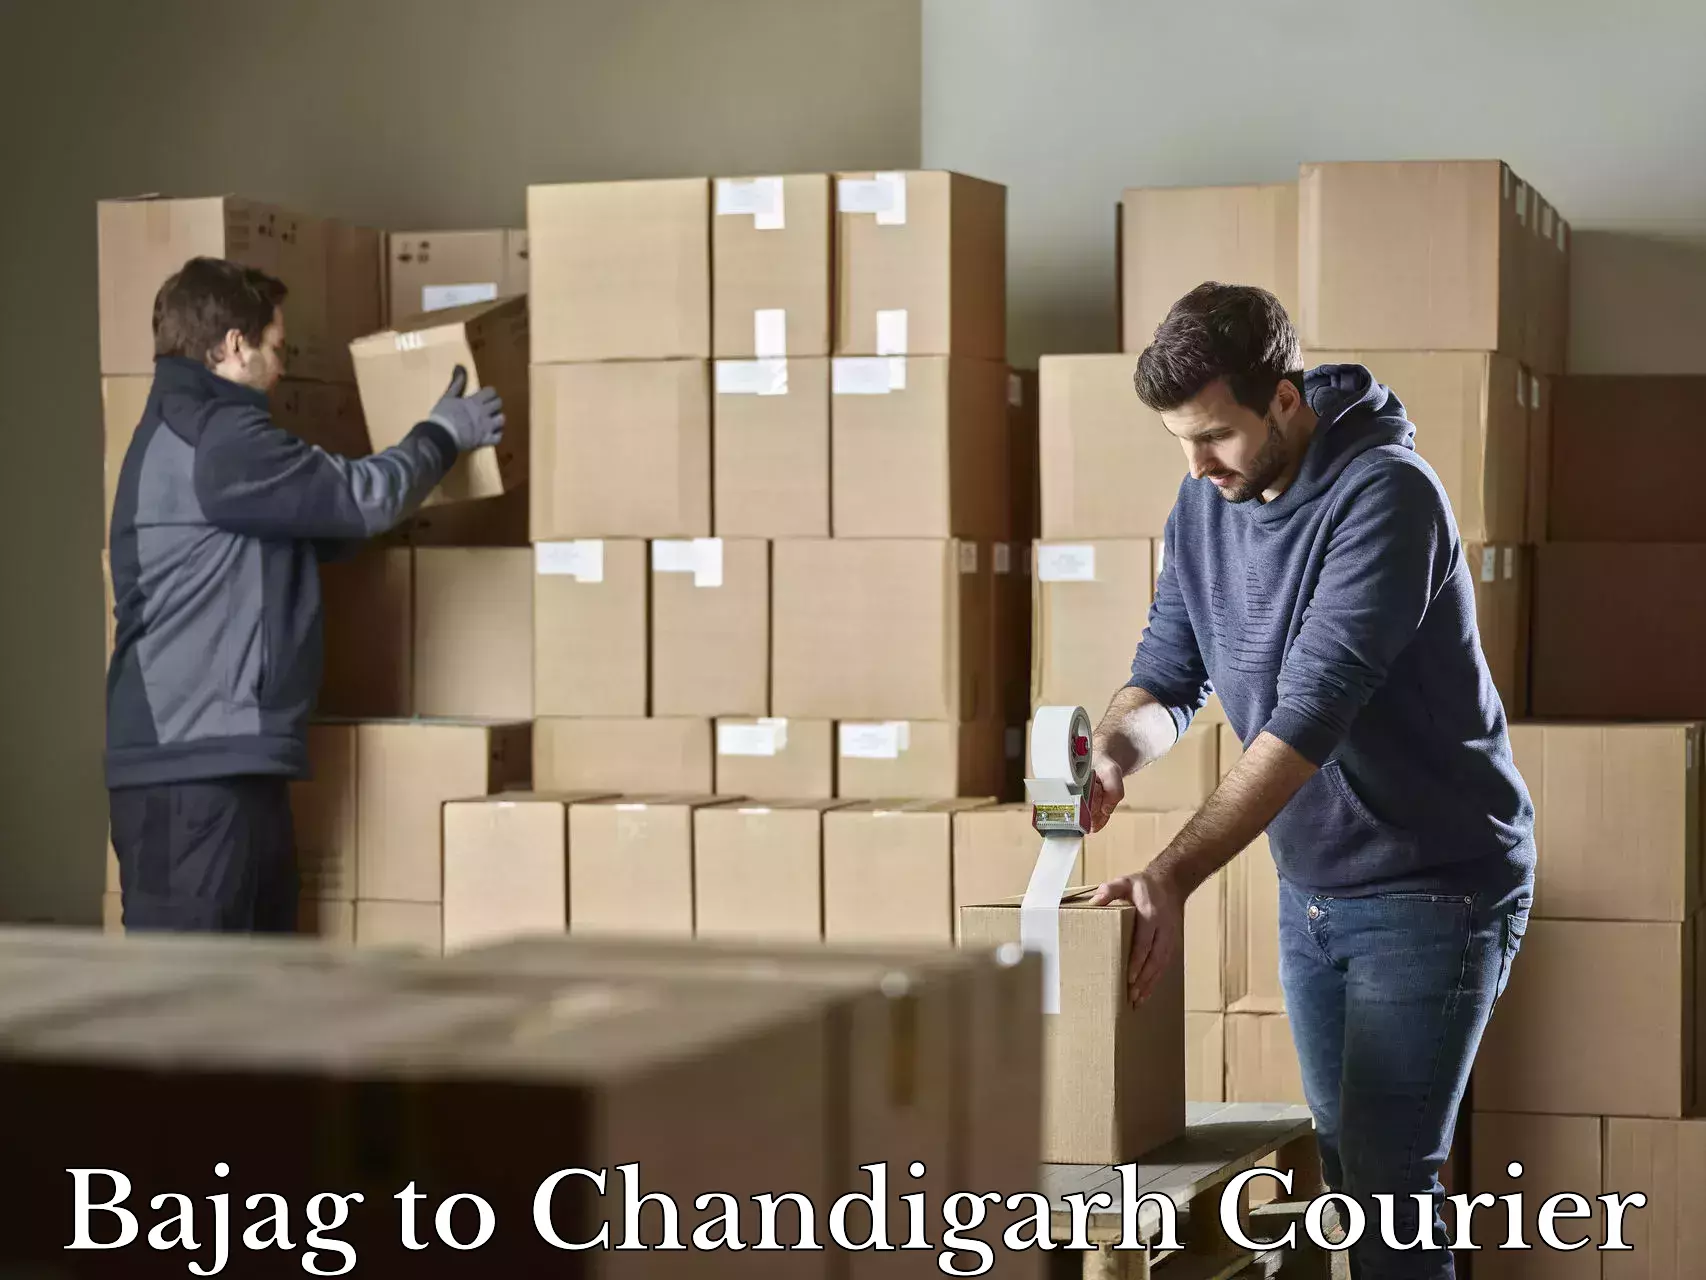 Luggage transport rates calculator Bajag to Chandigarh